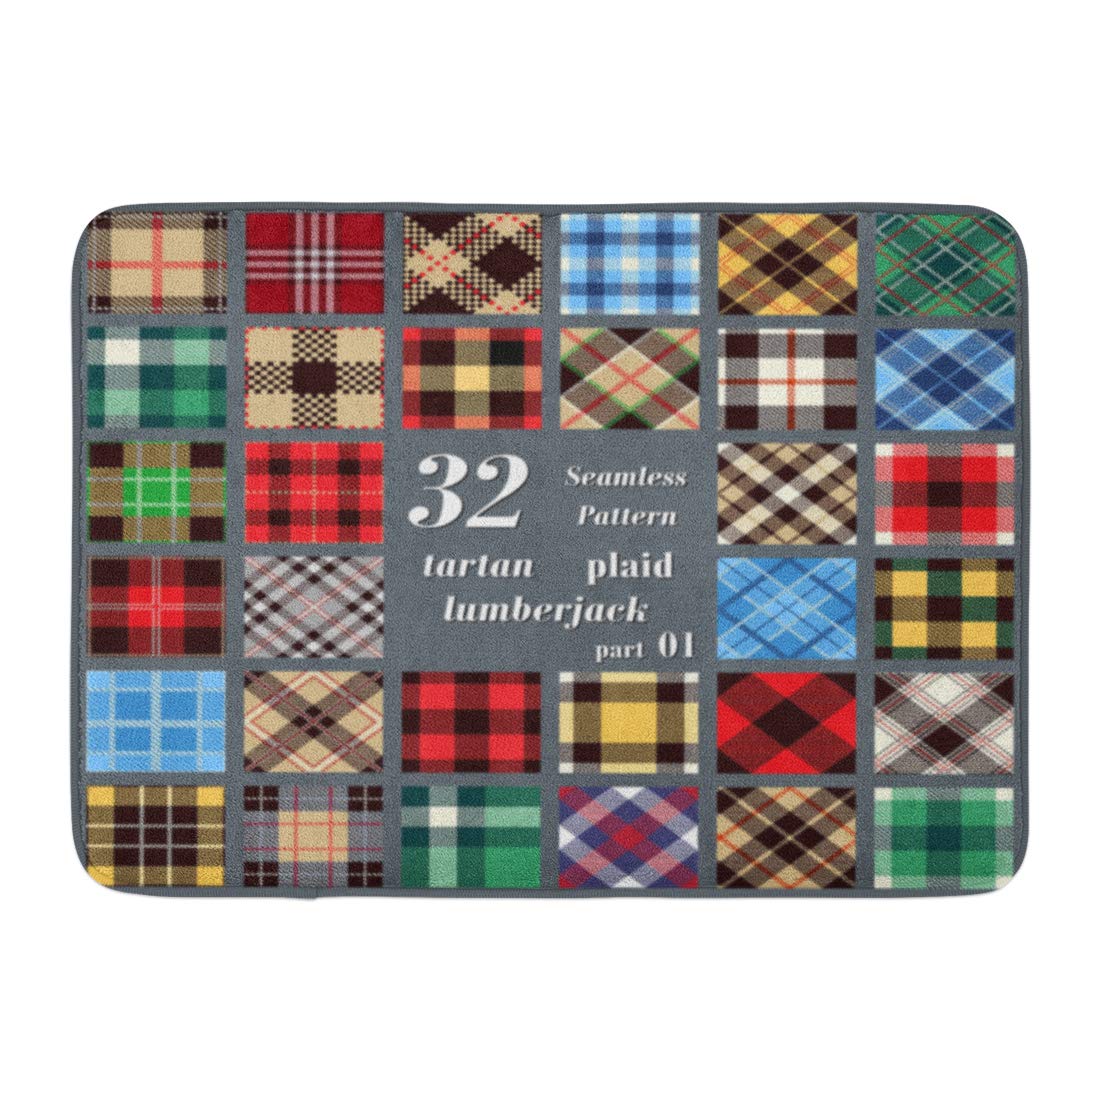 GODPOK Wool Plaid Tartan Trendy for Tiles Suits and House Interior As Well for Hand Crafts Flannel Lumberjack Rug Doormat Bath Mat 23.6x15.7 inch - image 1 of 1